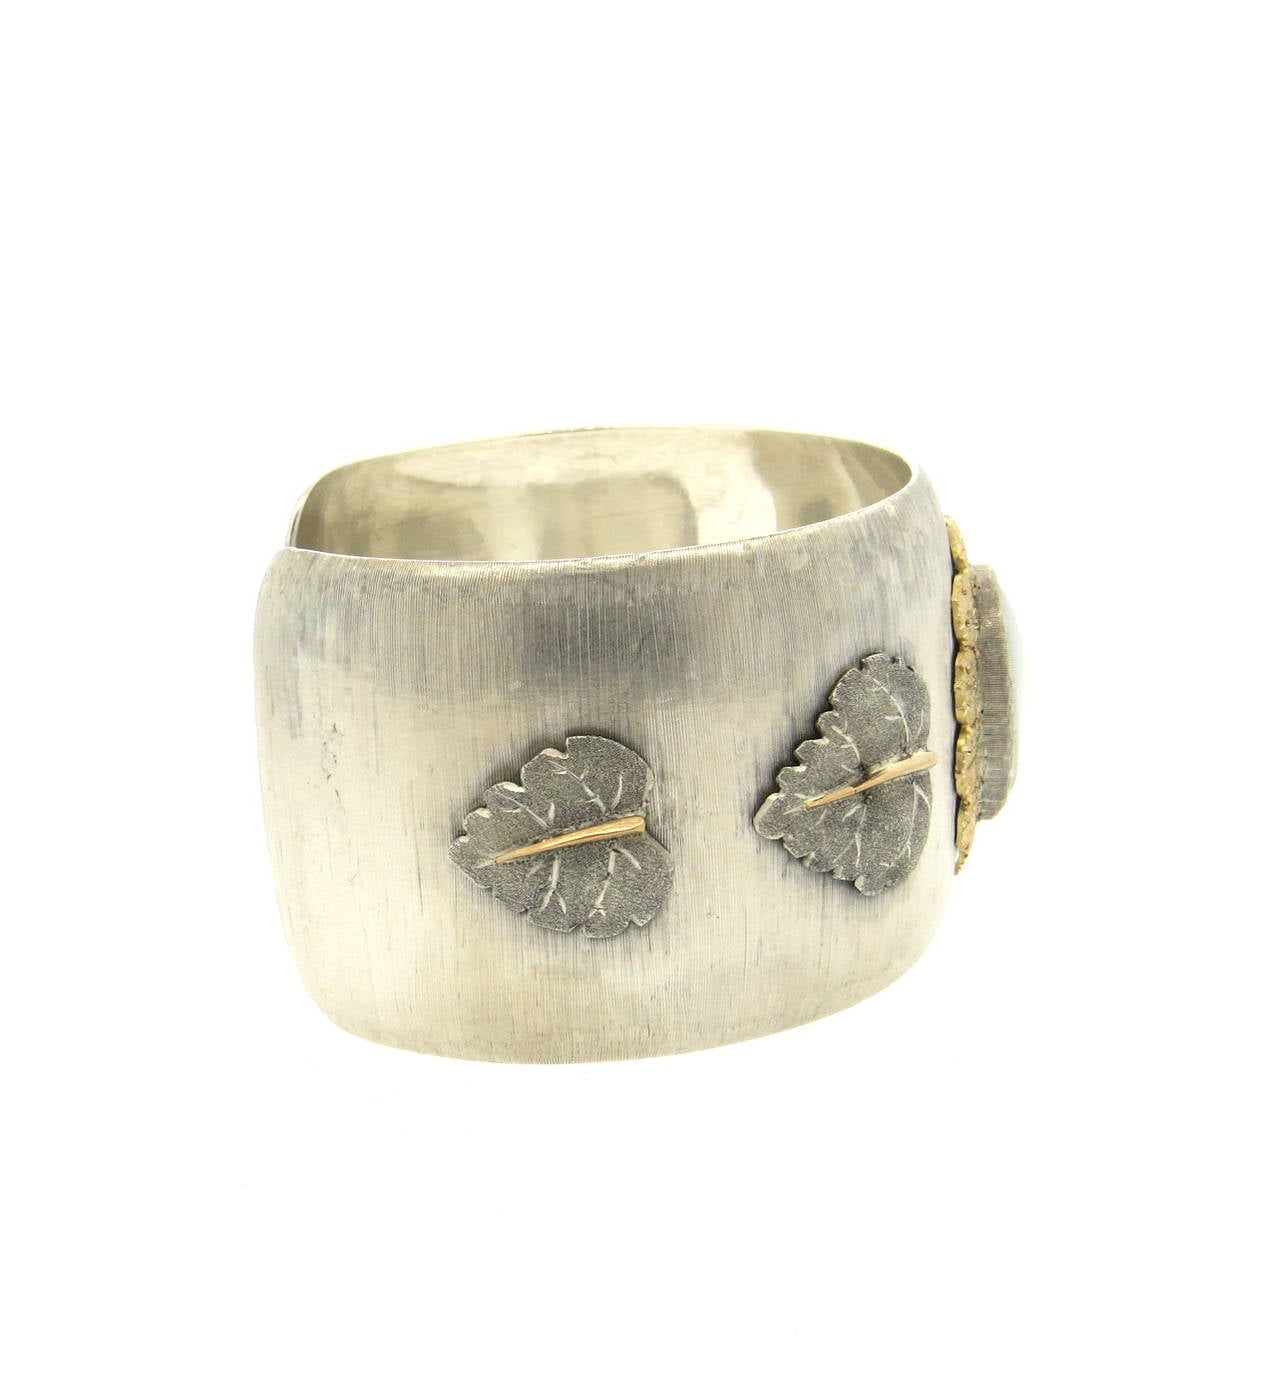 A sterling silver and 18k yellow gold cuff bracelet, set with a mabe pearl 18.1mm x 13.2mm in the center and leaf accents on the sides.  Crafted by Mario Buccellati, the cuff is 37mm wide and comfortably fits up to a 6.25